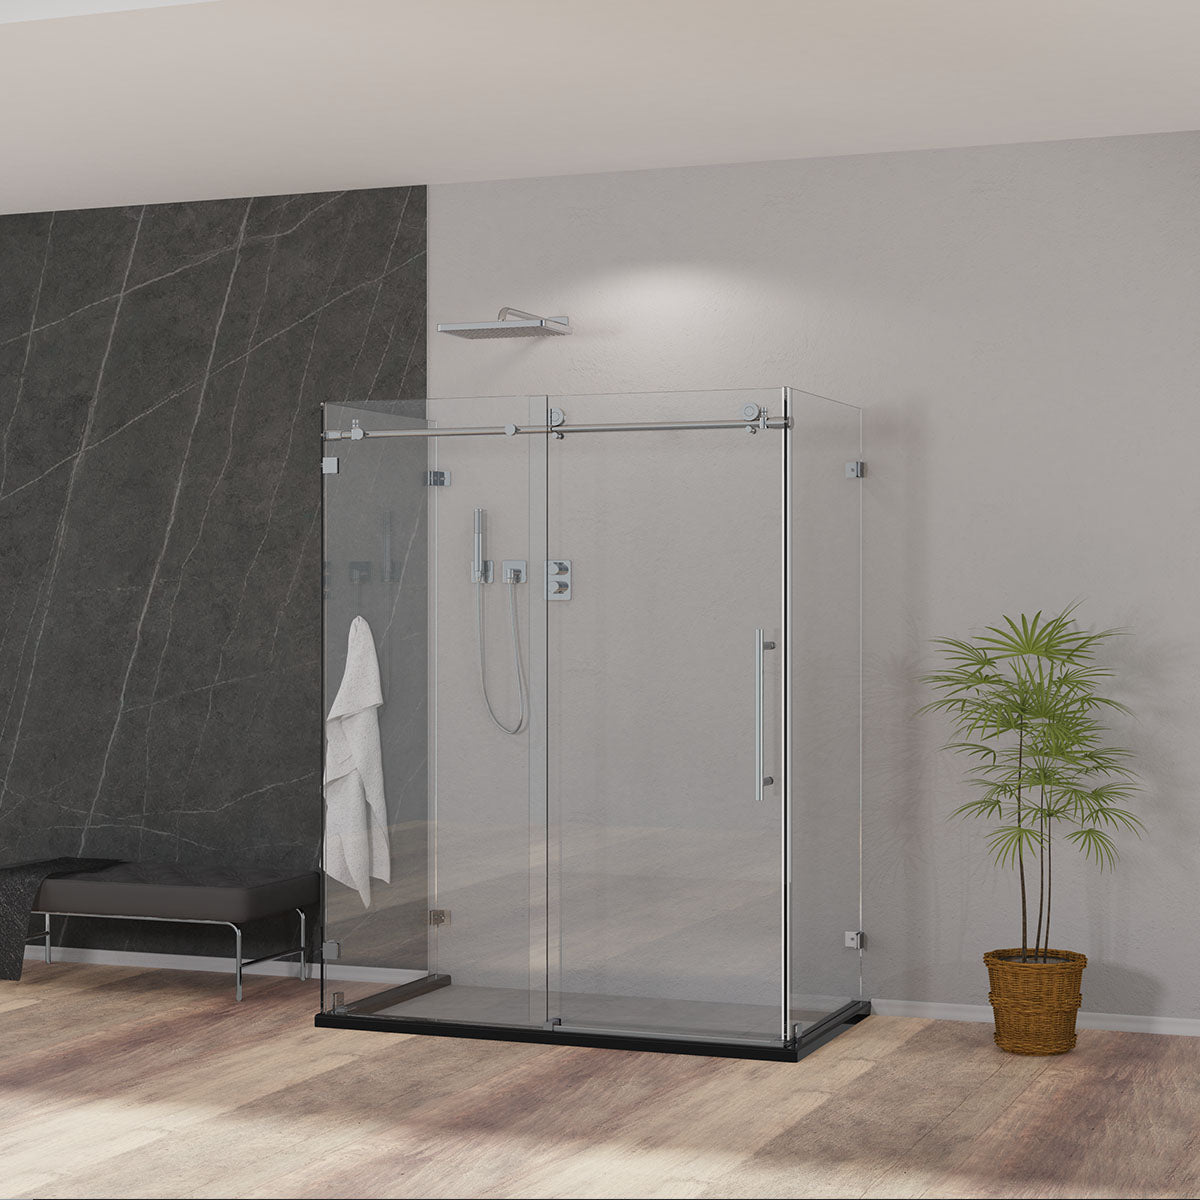 Custom U-Shape, BH01 Frameless Single Sliding Shower Door with Two Return Panels 46"-72" W, RP 28" 30" - 48"D x 76" H (3/8" Thickness) (Chrome, Brushed Nickel, Matte Black & Brushed Gold) in stocks ready to be delivery - iStyle Bath